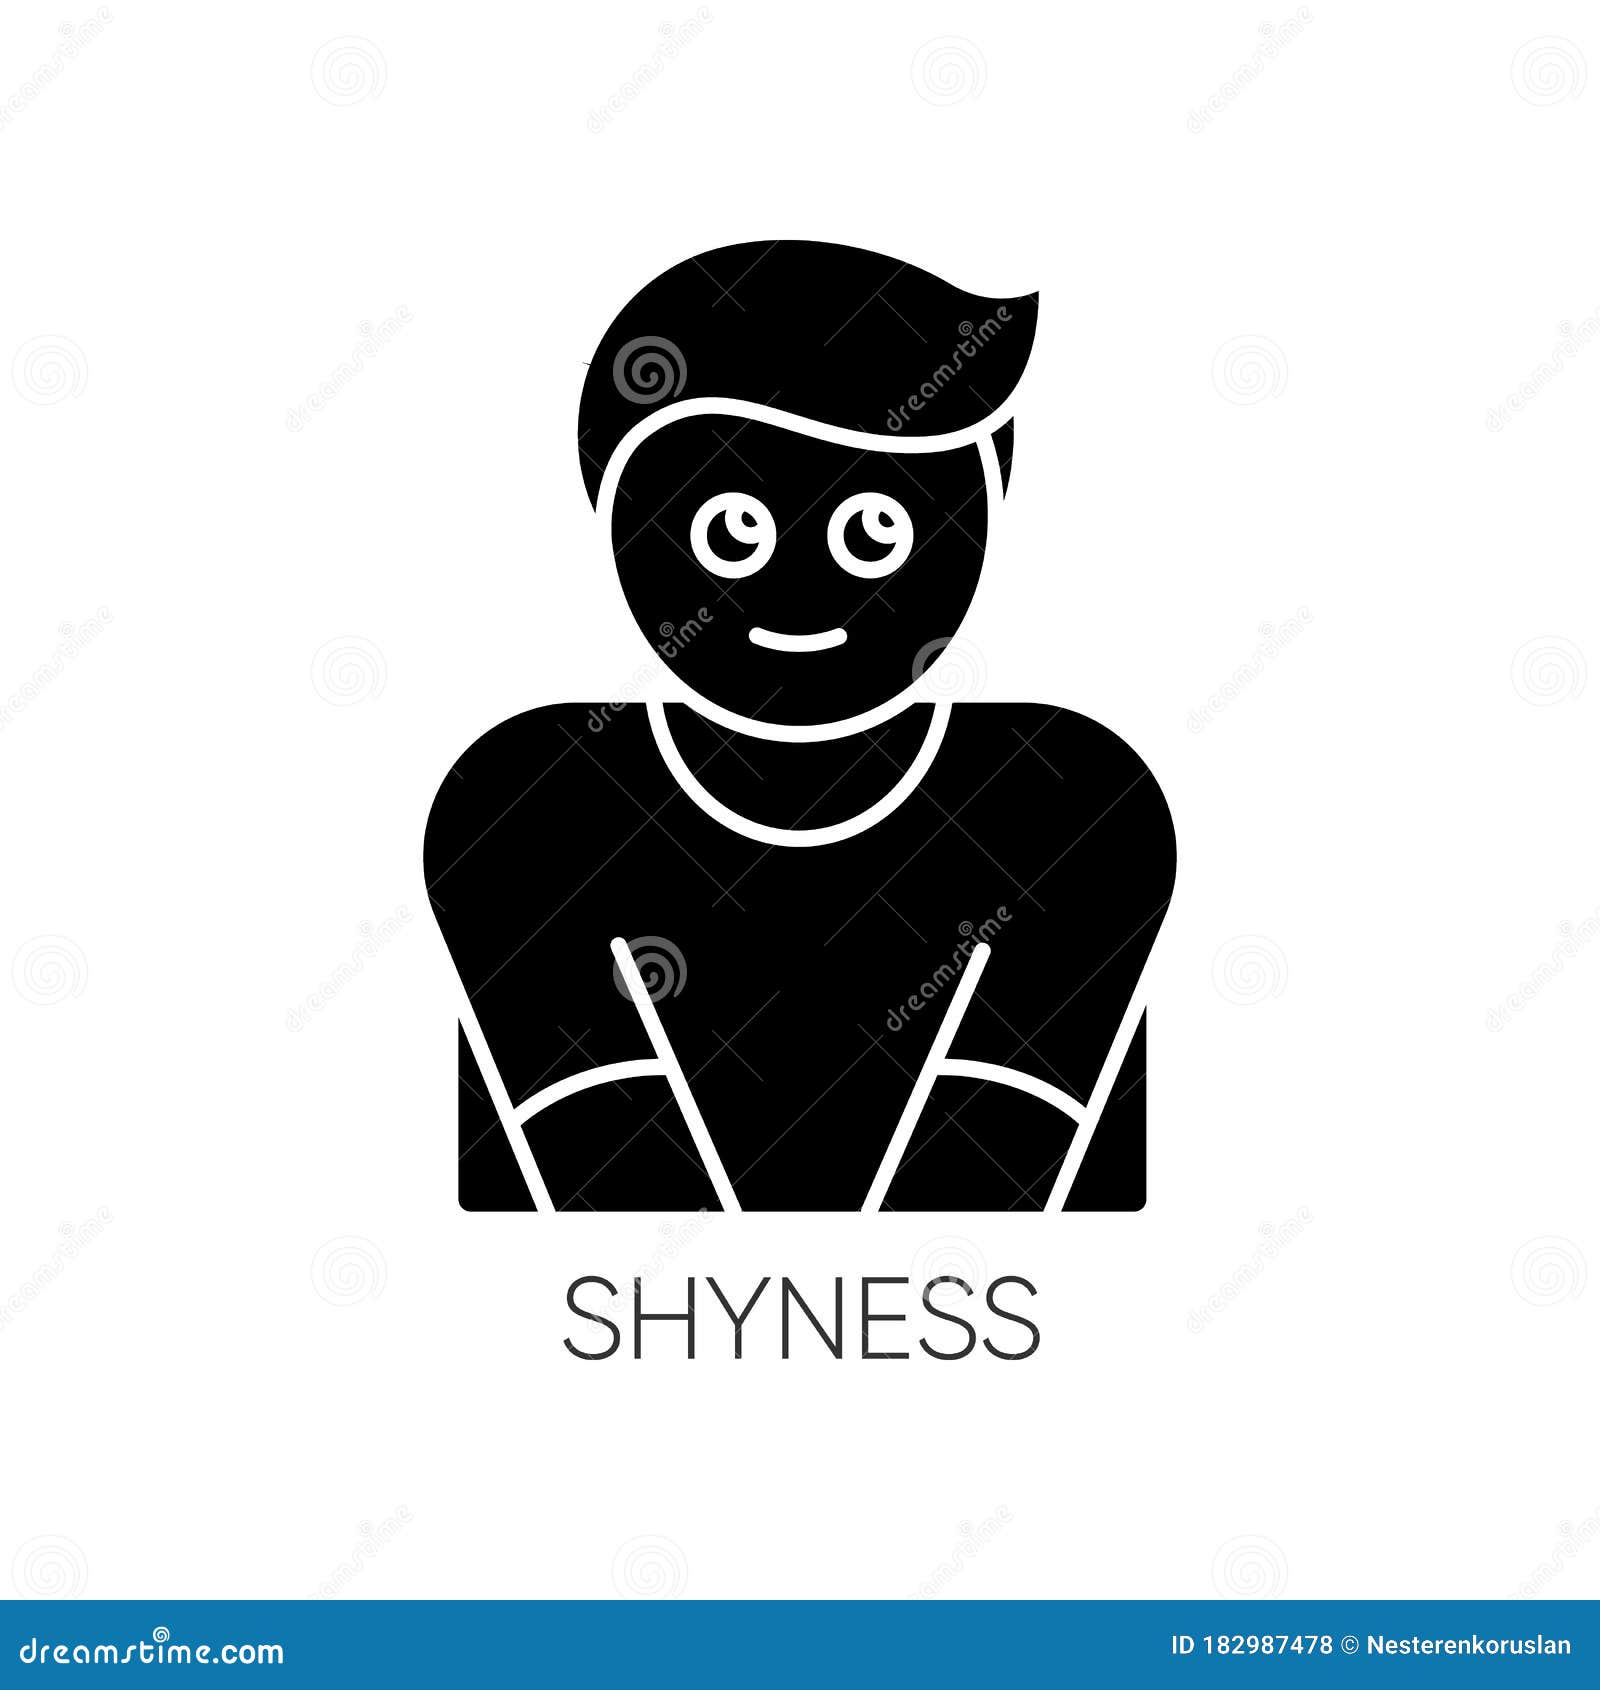 Shyness Introversion Royalty Free Stock Image